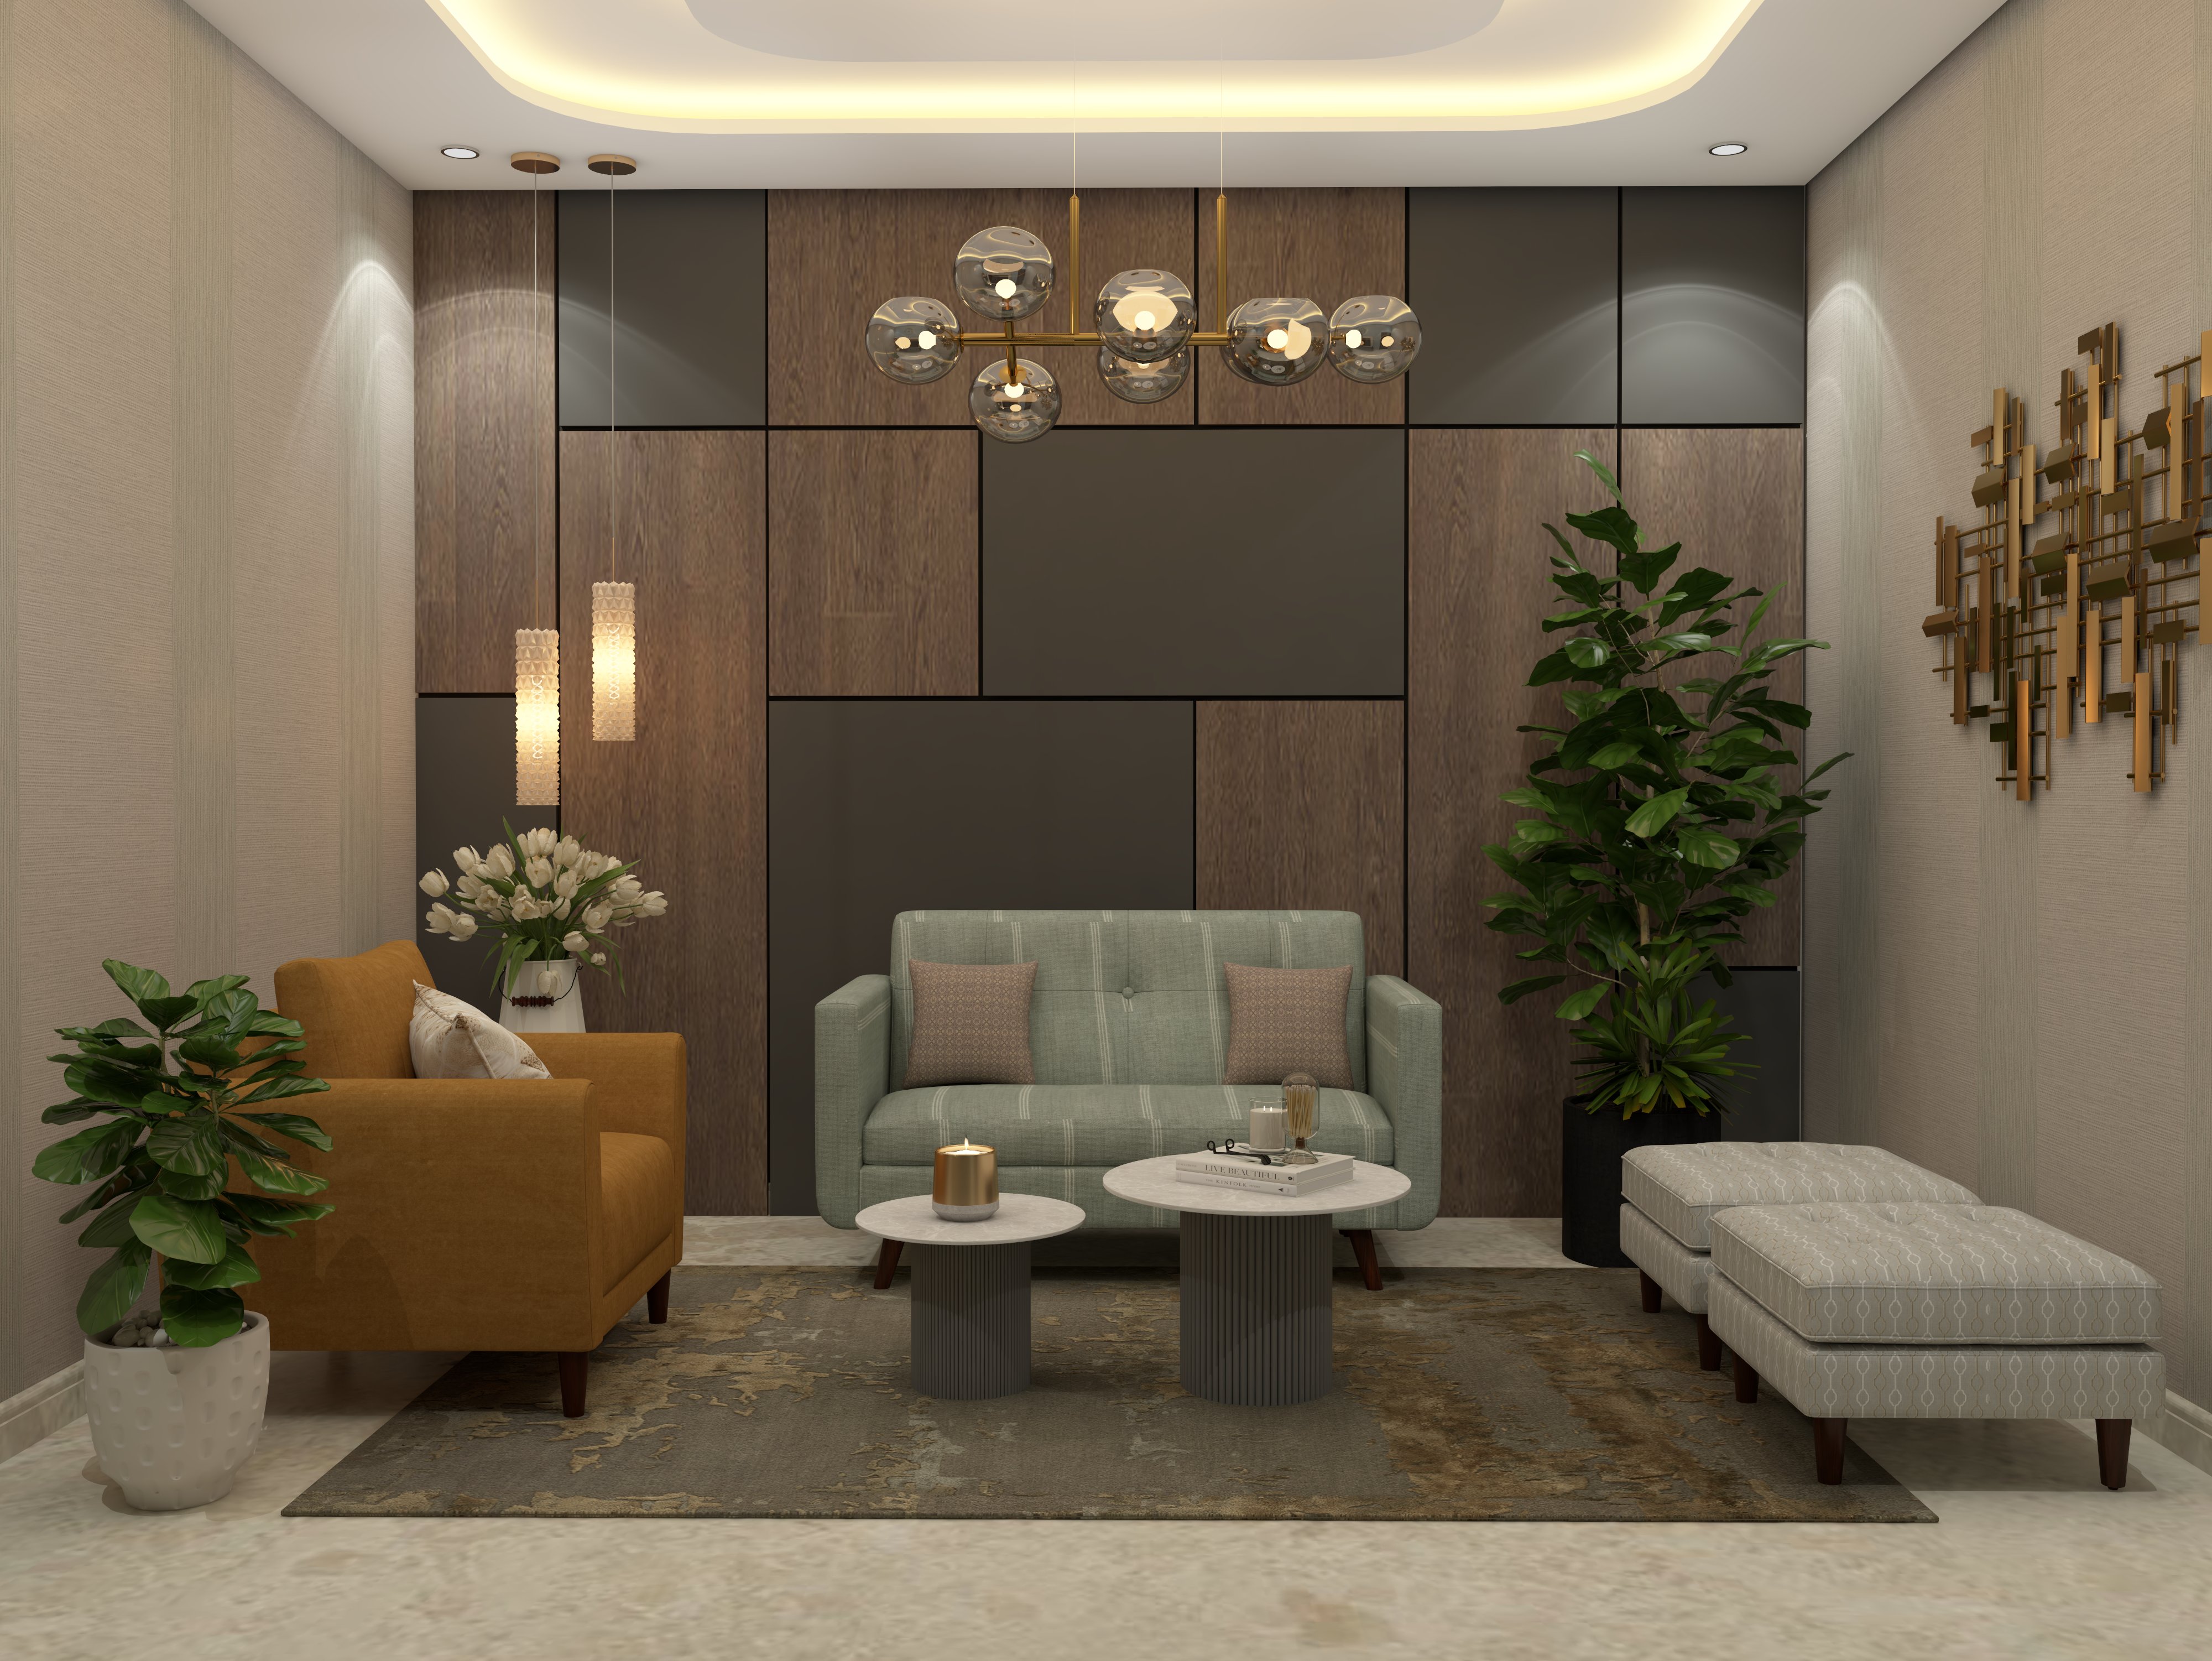 Modern foyer design with Royal furniture and wooden wall paneling - Beautiful Homes